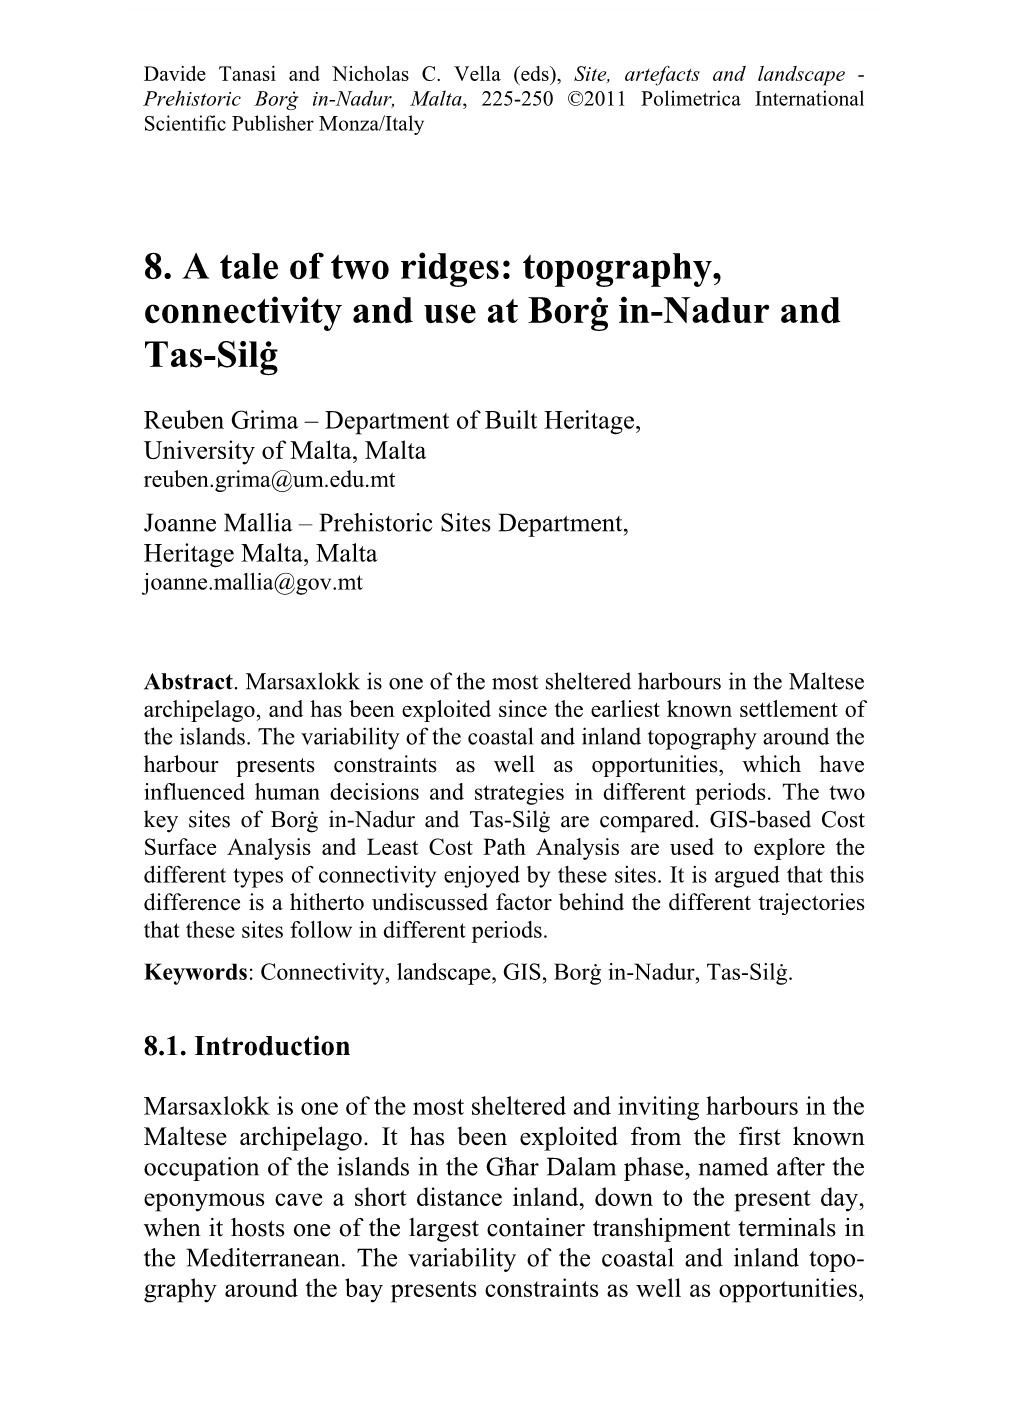 8. a Tale of Two Ridges: Topography, Connectivity and Use at Borġ In-Nadur and Tas-Silġ